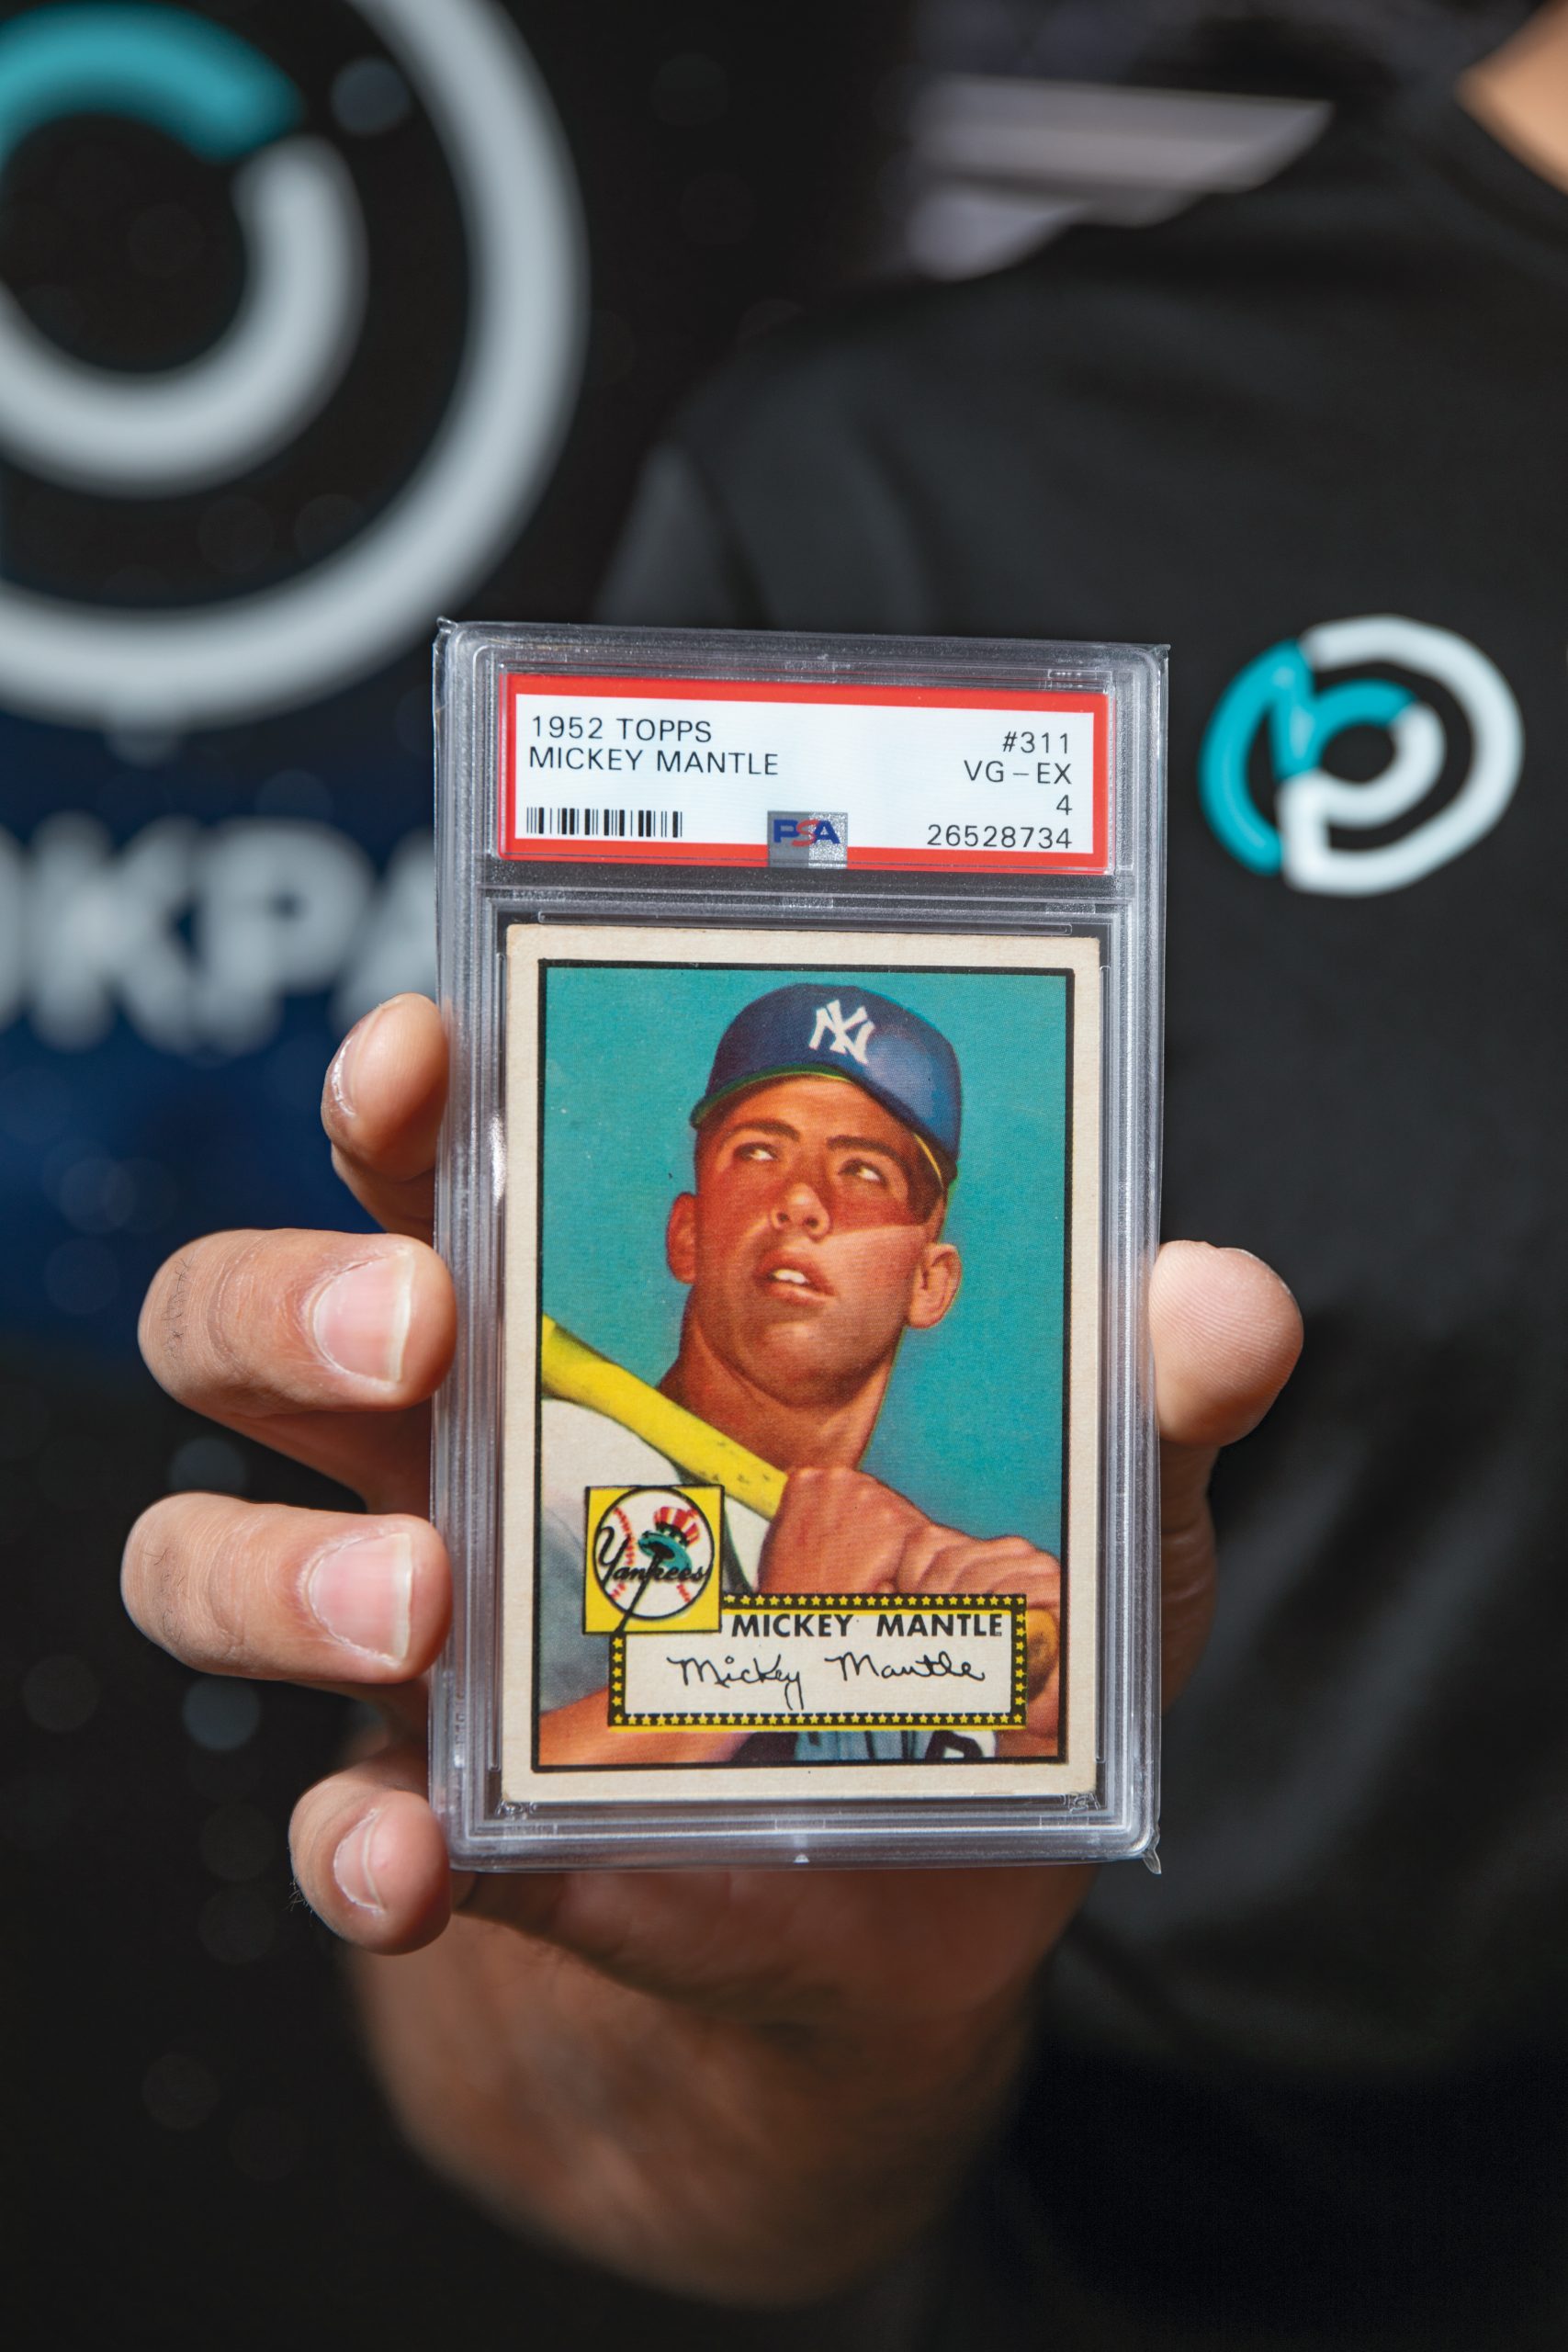 Old meets new as ownership of this 1952 Mickey Mantle rookie card is now tokenized as an NFT and available for purchase using Ether (“ETH” — the currency of the Ethereum blockchain and the most popular cryptocurrency for buying and selling NFTs). Top copies of this card sell for 
$5 million+. 